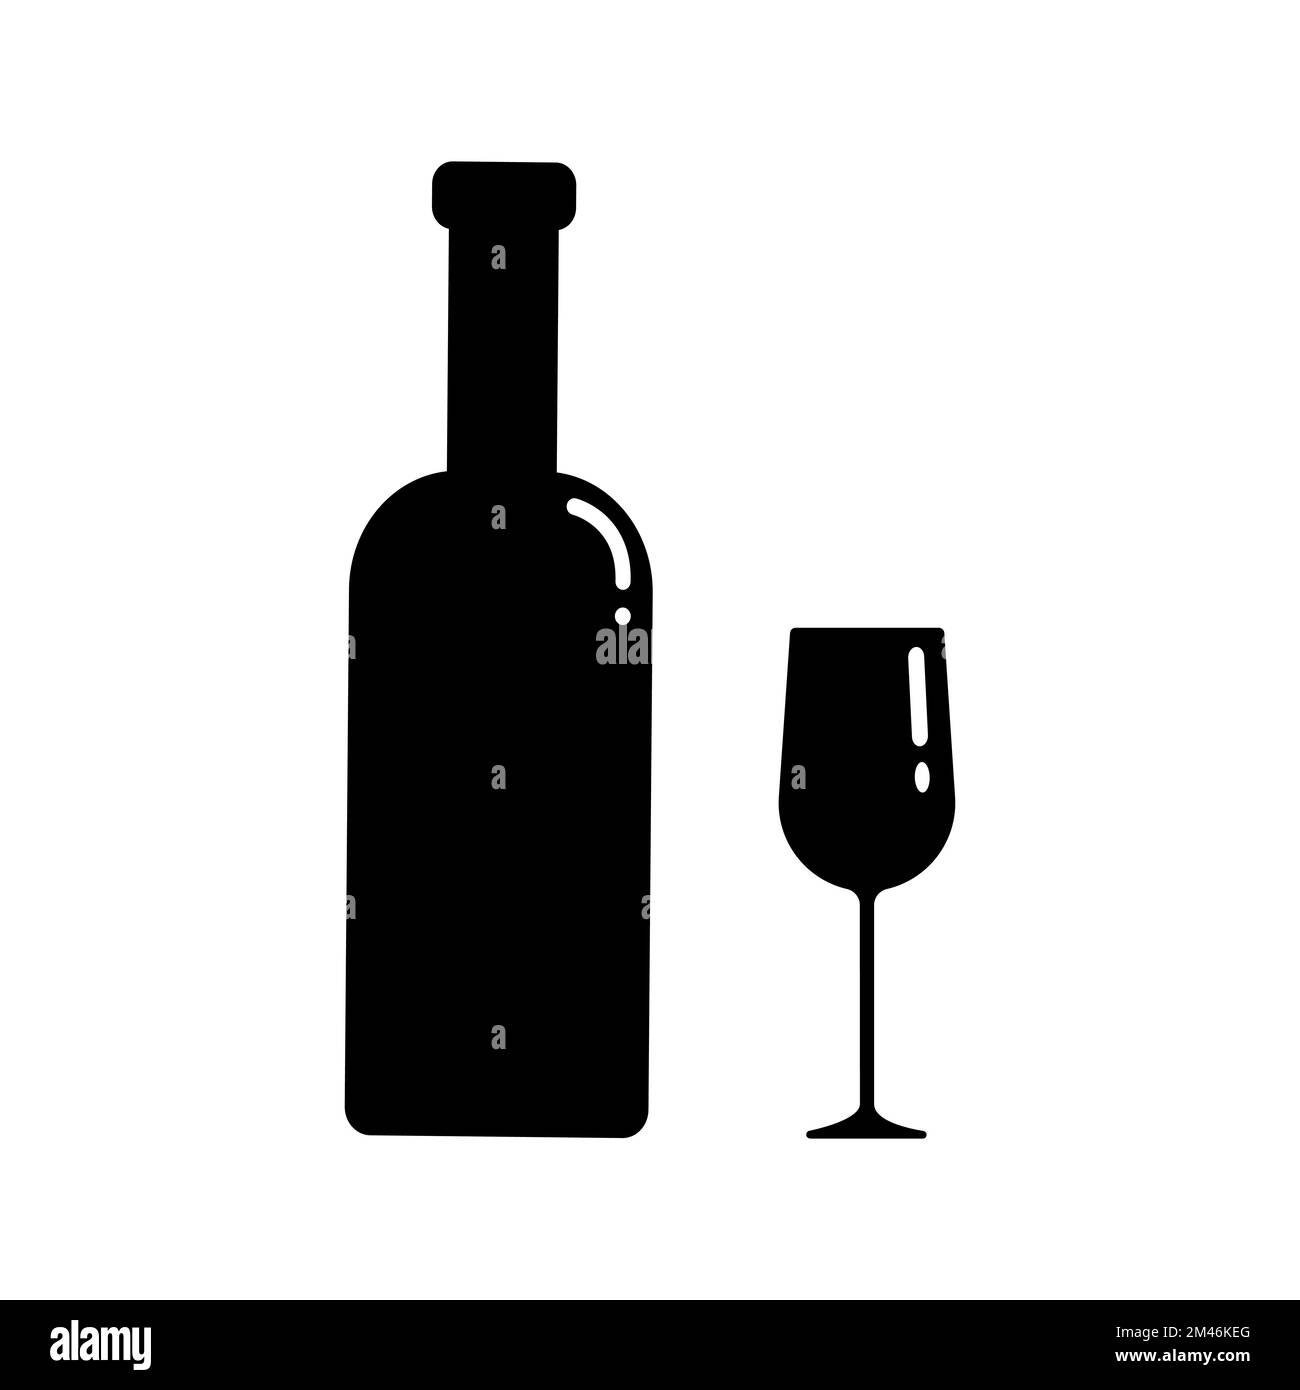 Set of alcohol bottle and glass silhouettes. Vector clip art isolate on white. Simple minimalist illustration in black color. Stock Vector